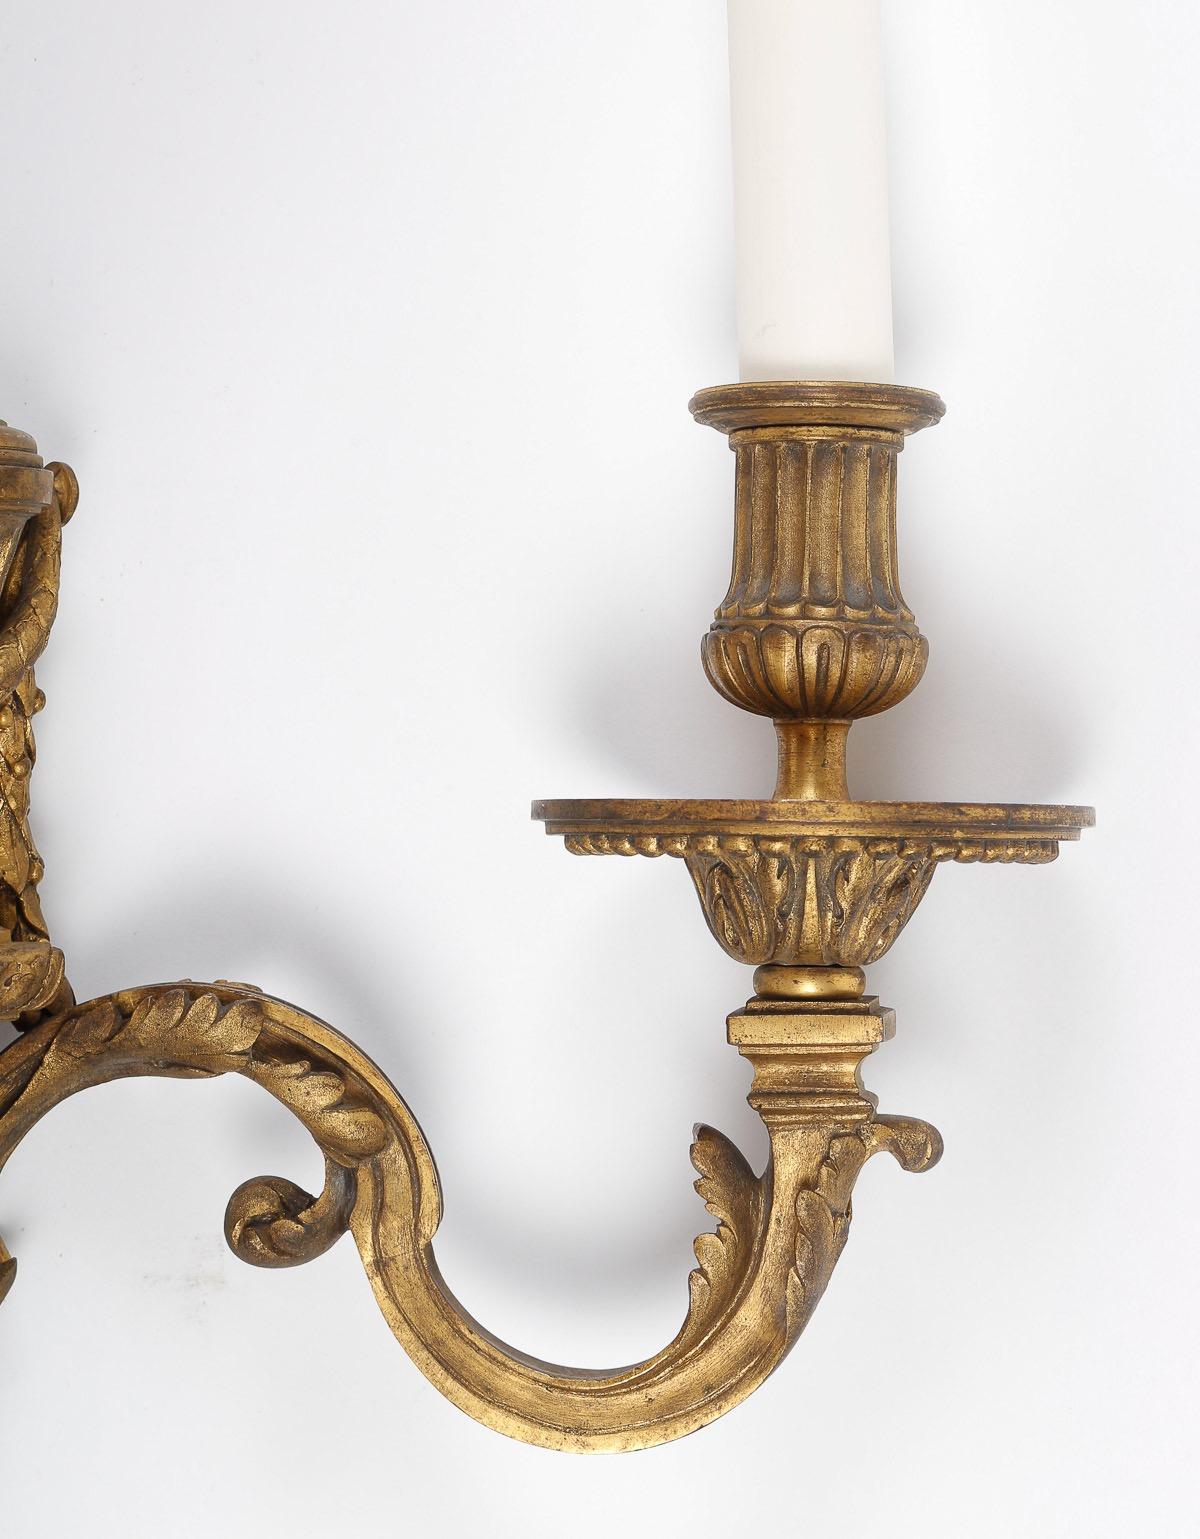 Late 19th Century French Pair of Napoleon III Ormolu Wall-Lights after Jean-Charles Delafosse For Sale